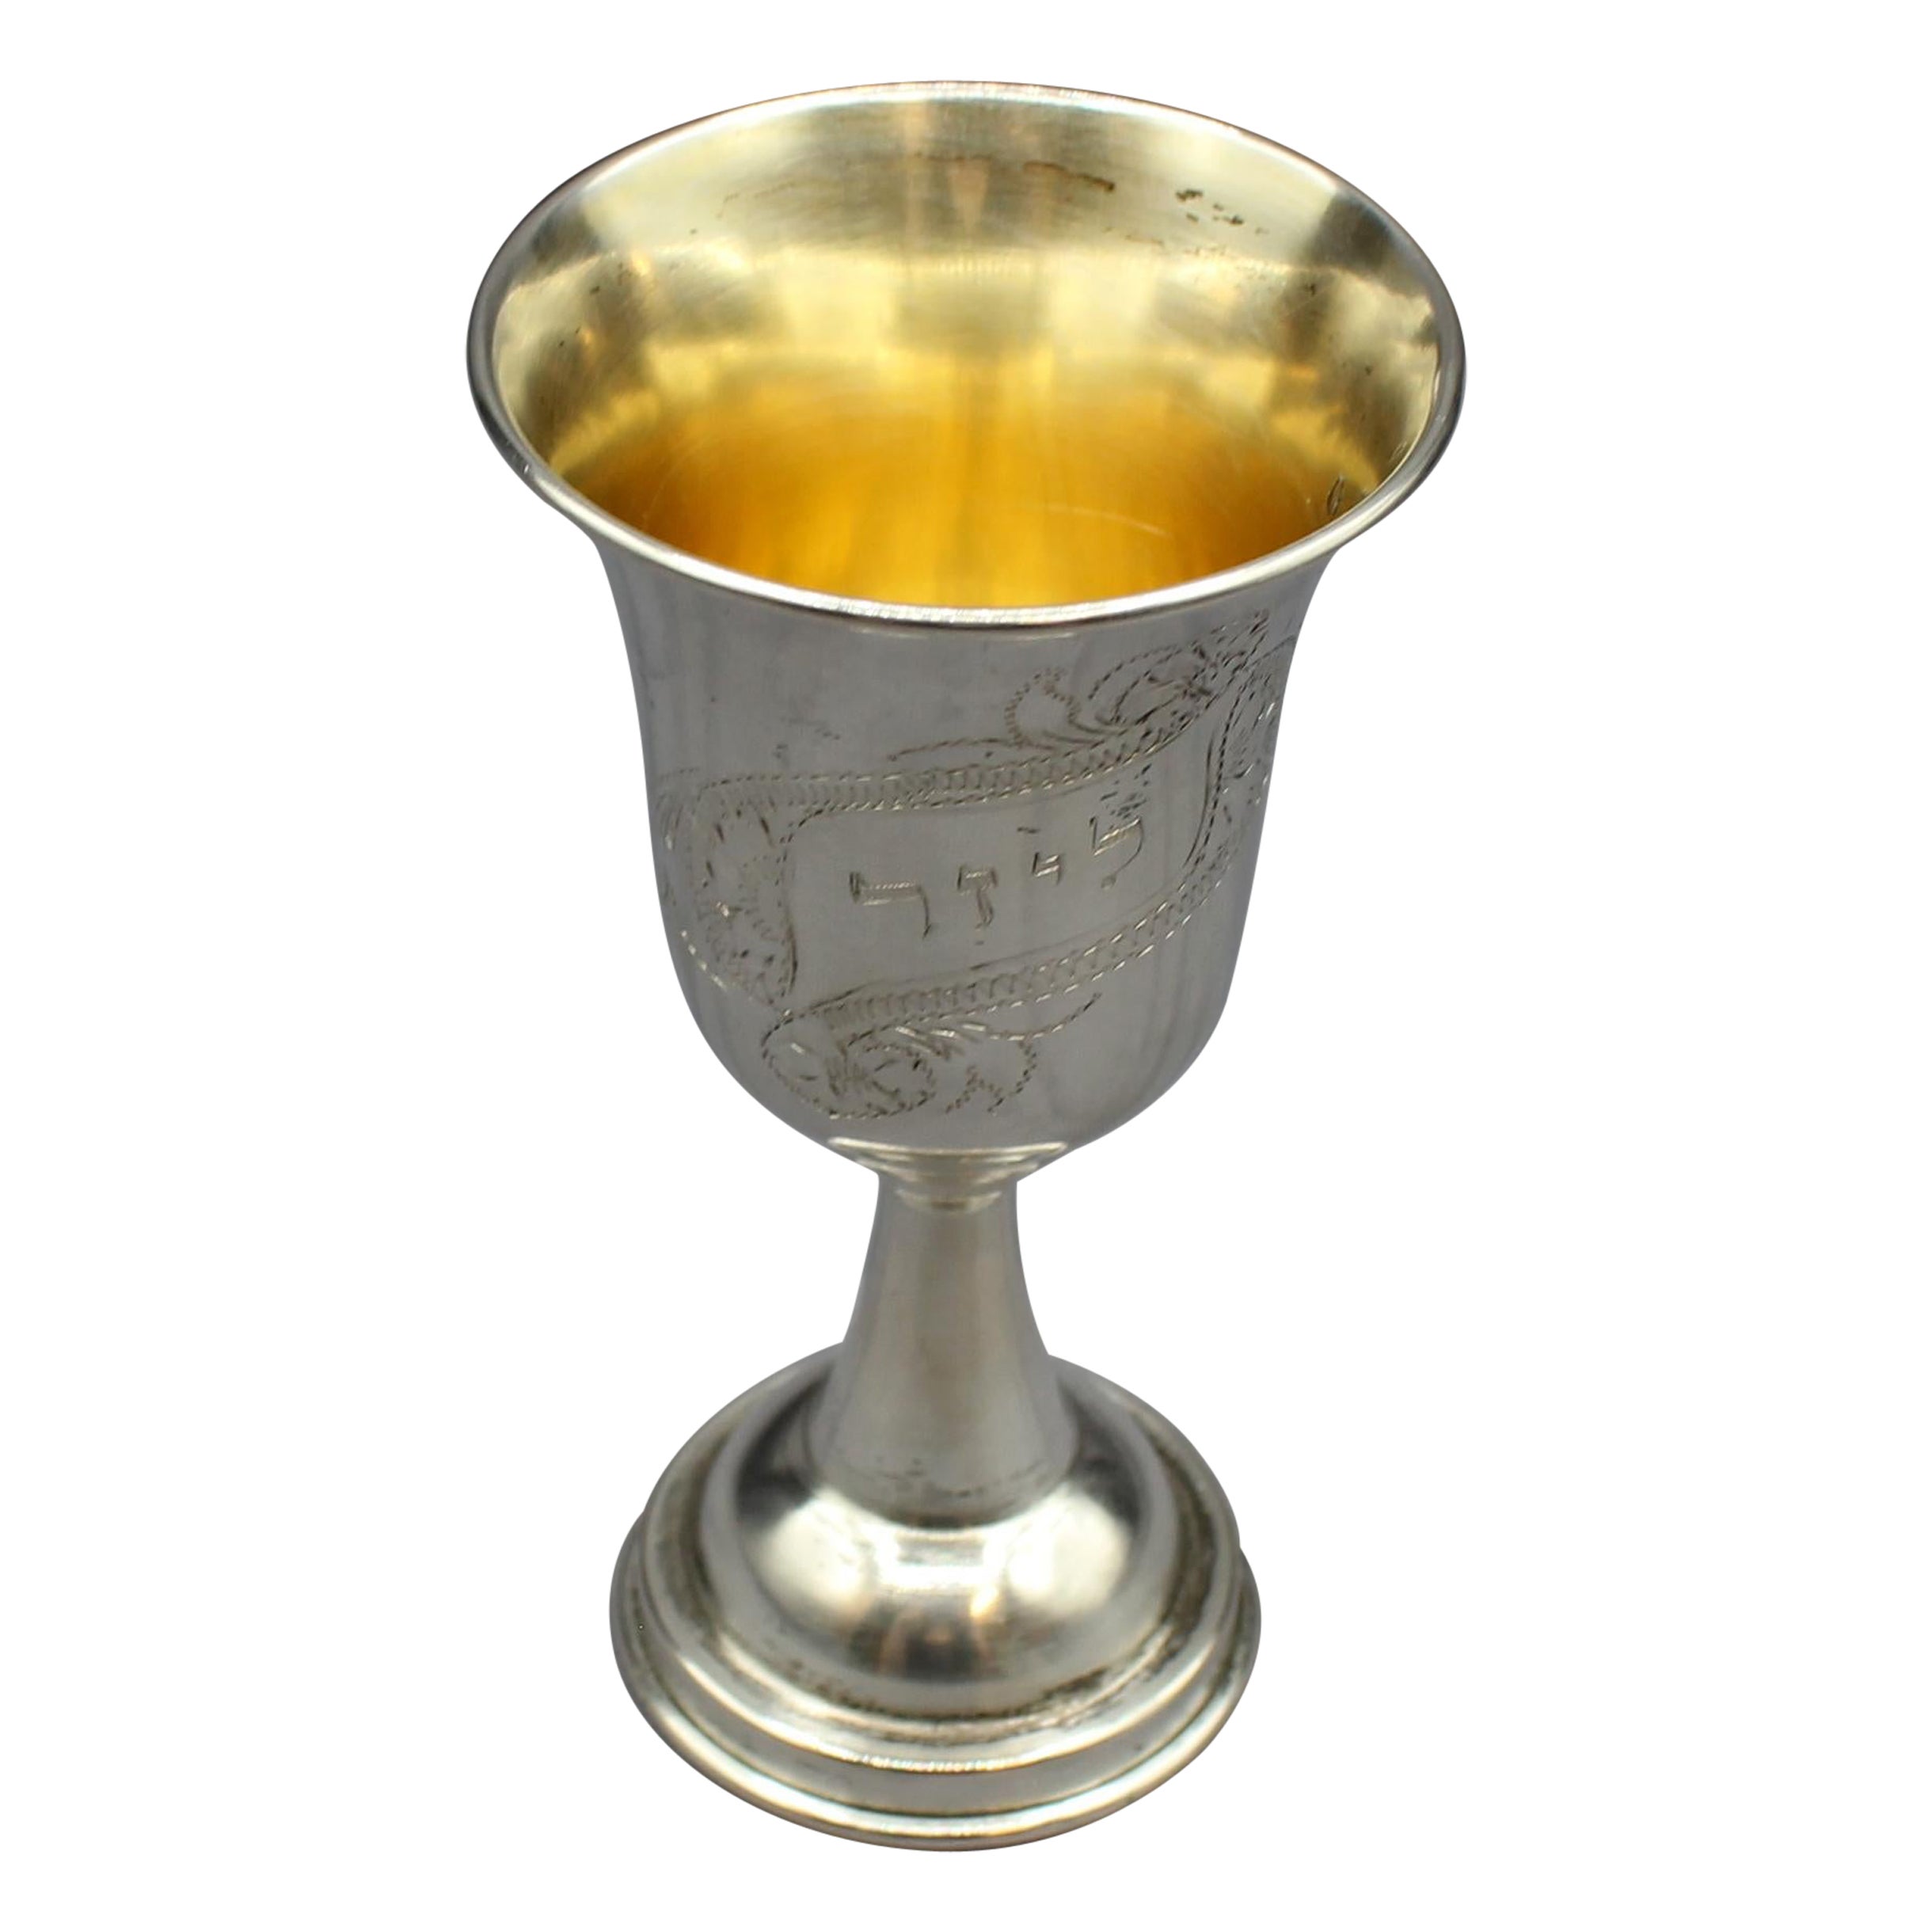 Continental Silver Kiddush Cup